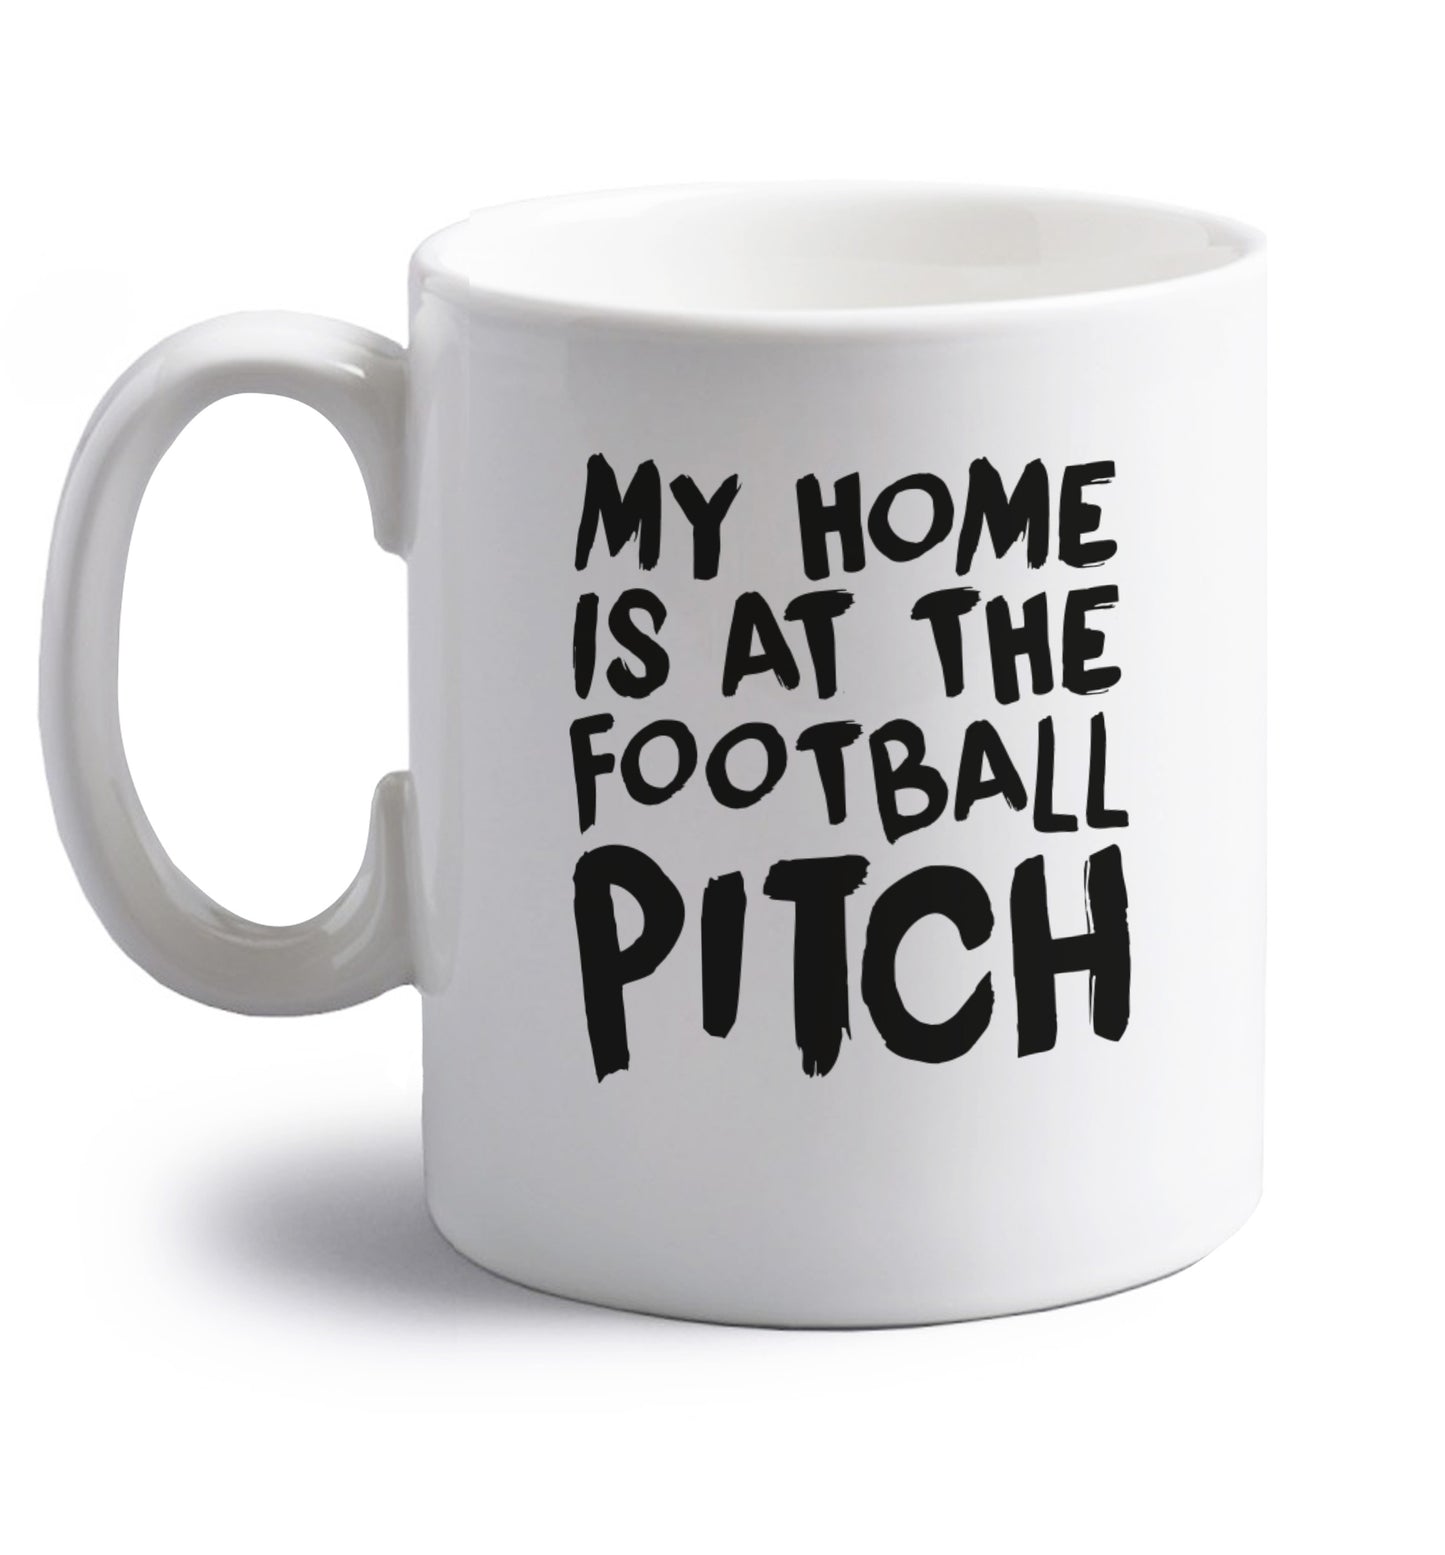 My home is at the football pitch right handed white ceramic mug 